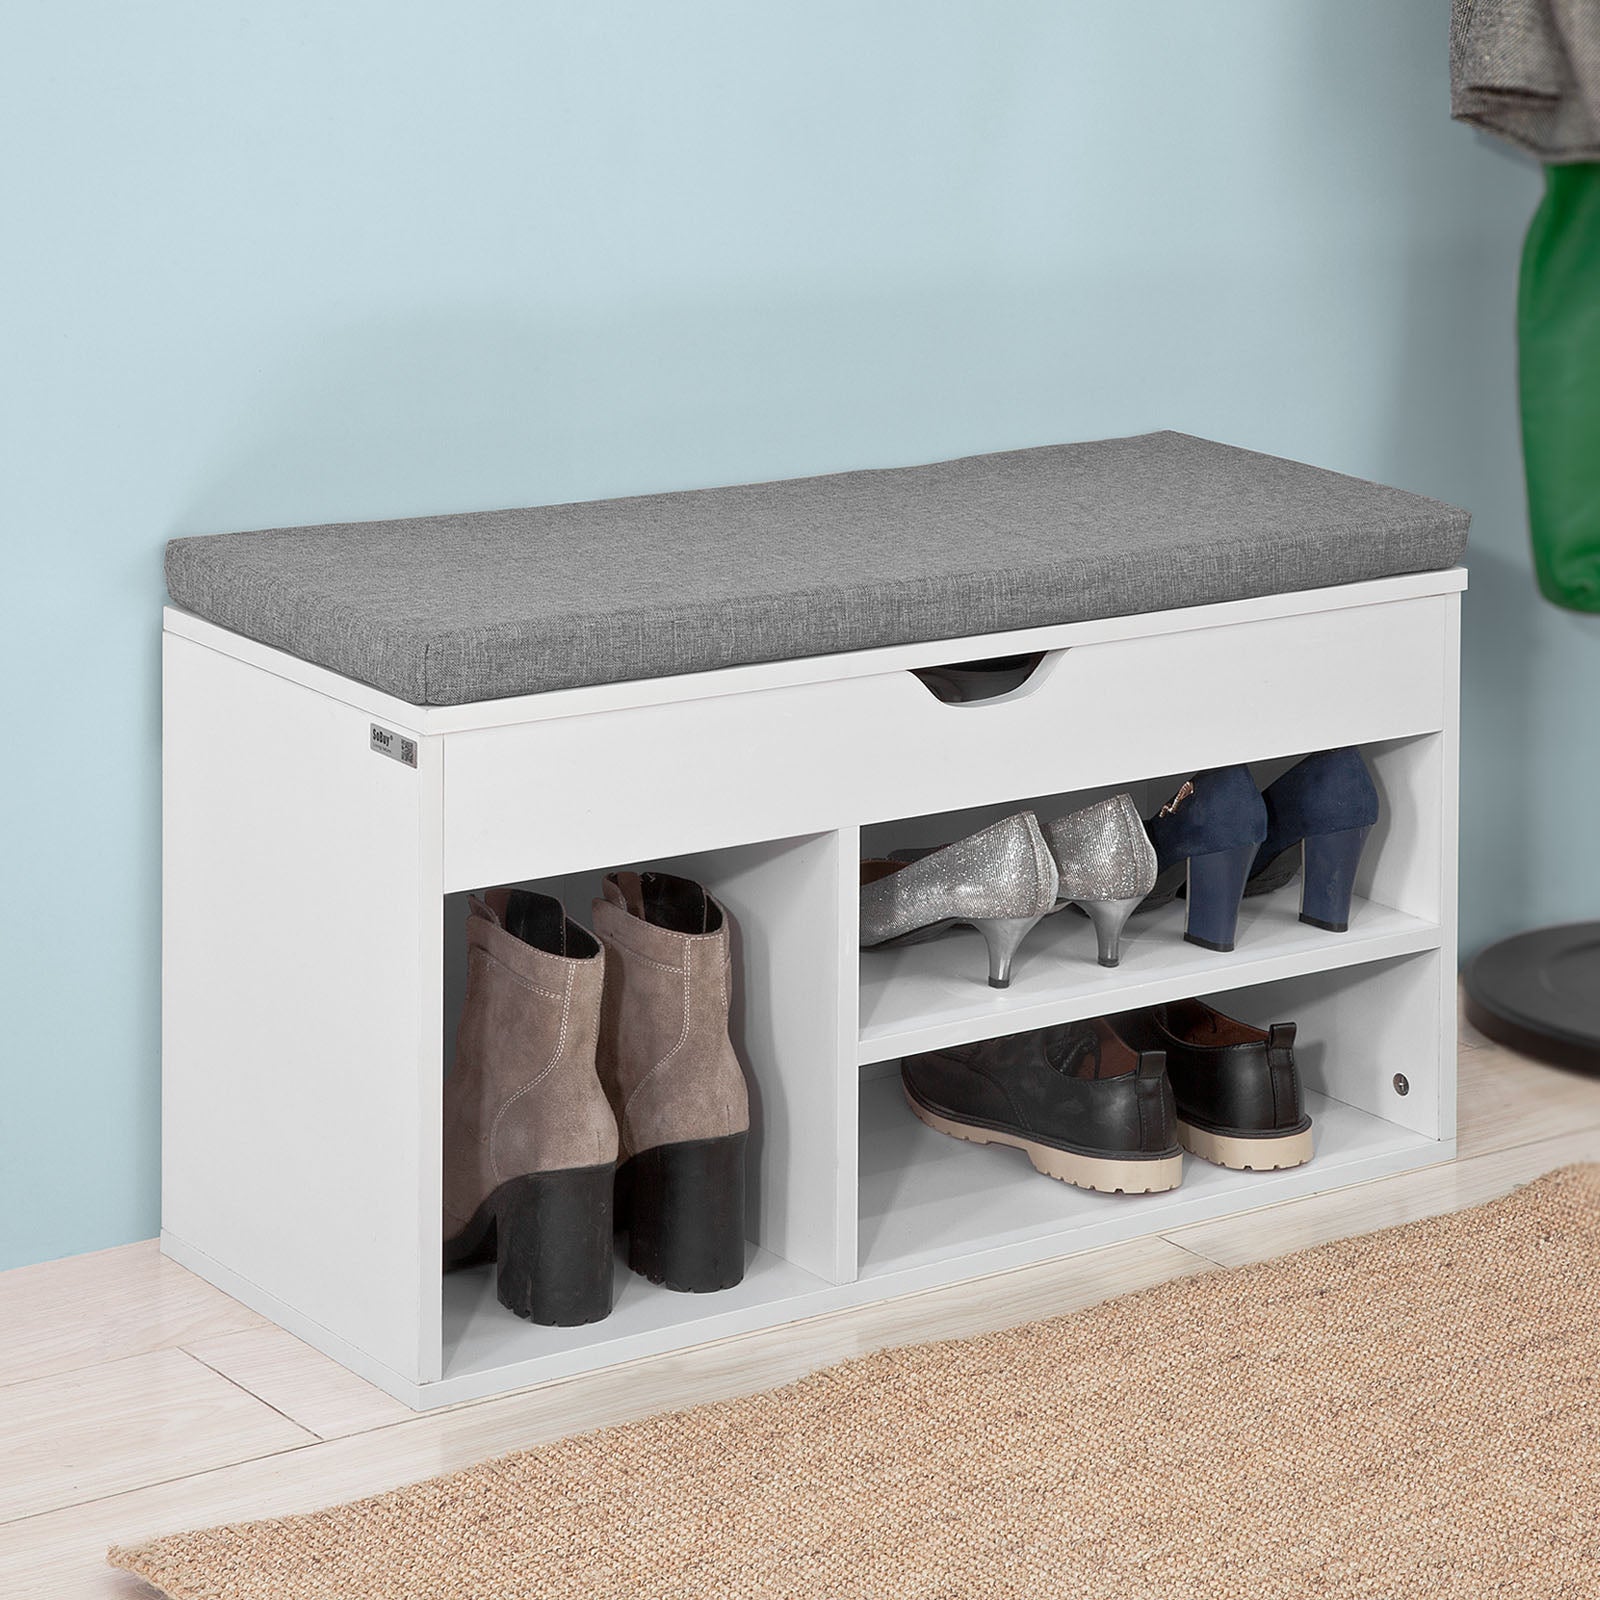 SoBuy FSR45-HG,Shoe Storage Cabinet,Shoe Rack Shoe Bench with Lift Up Bench Top and Grey Cushion